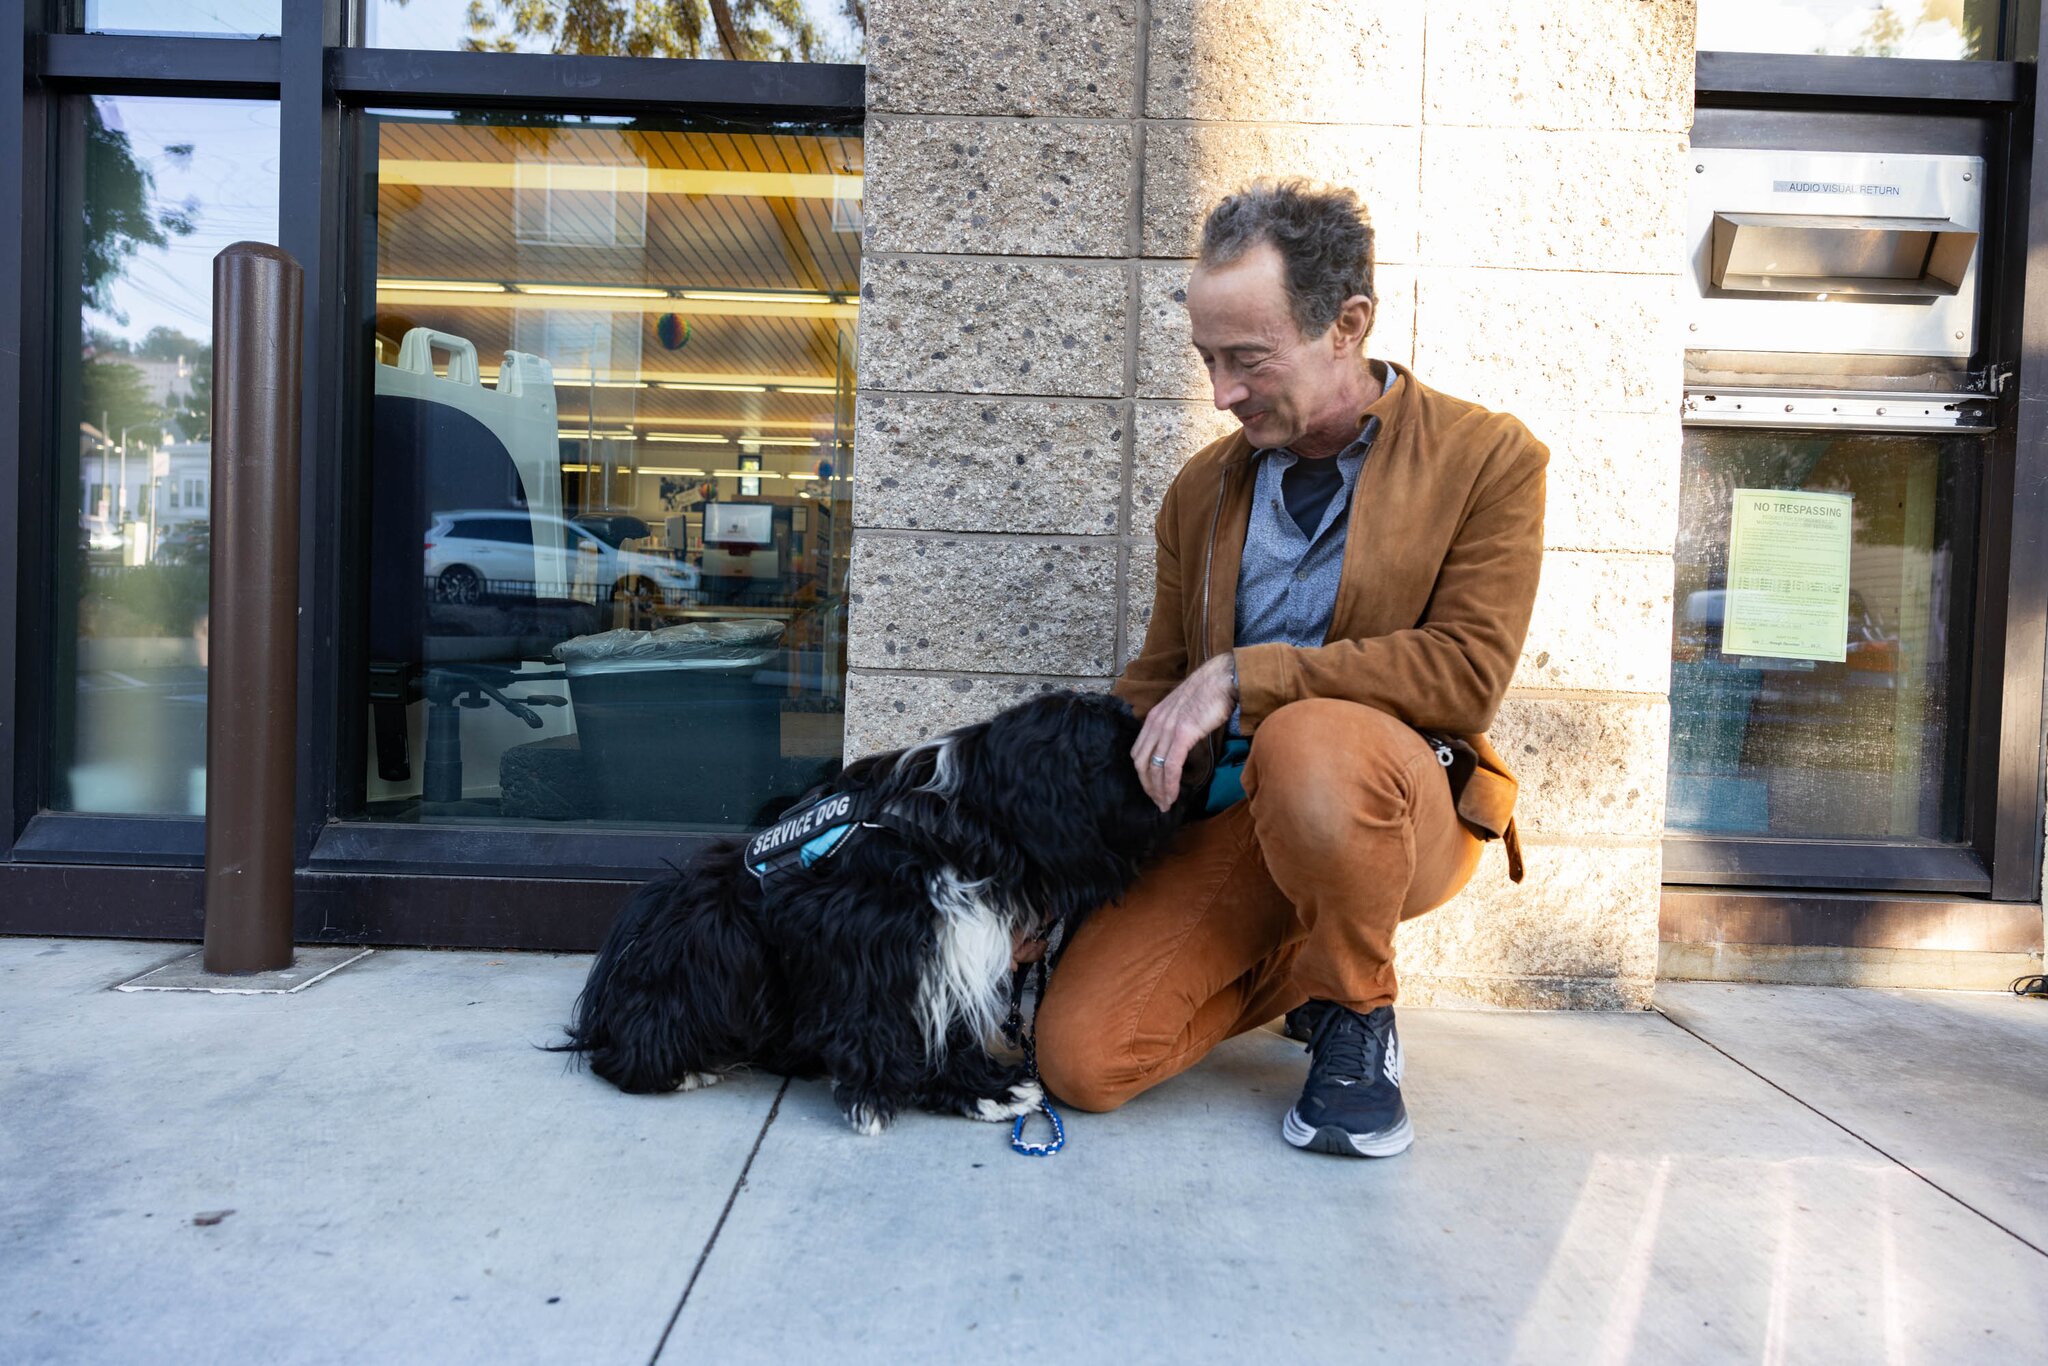 A small black dog lies on a sidewalk as it is petted by its owner, who is wearing black sneakers and orange pants.